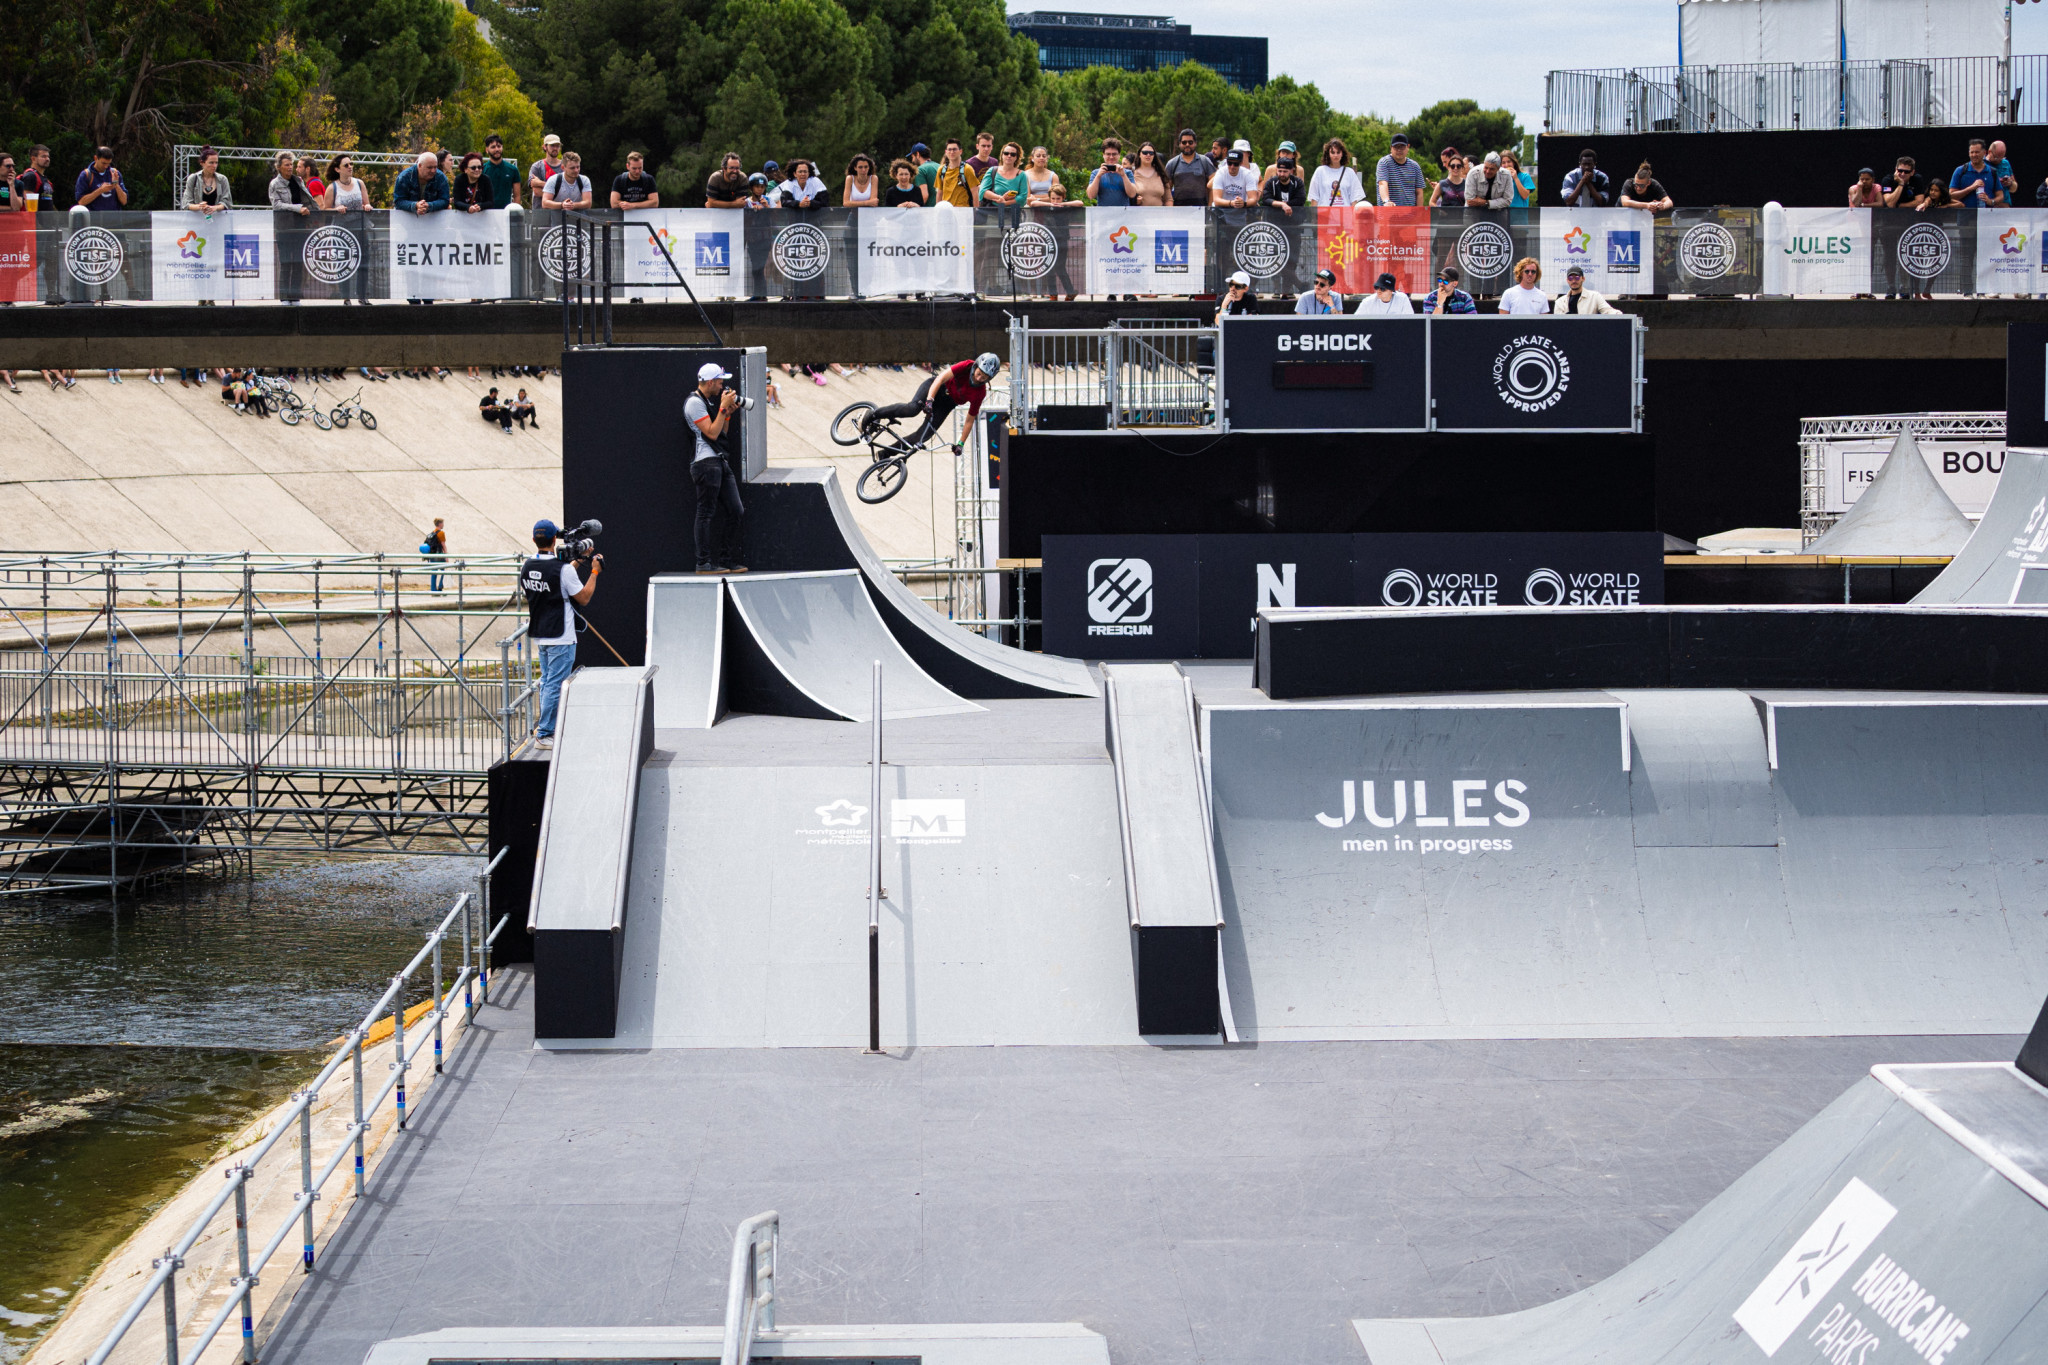 Villegas Serna fends off Olympic heavyweights to win freestyle BMX gold at FISE